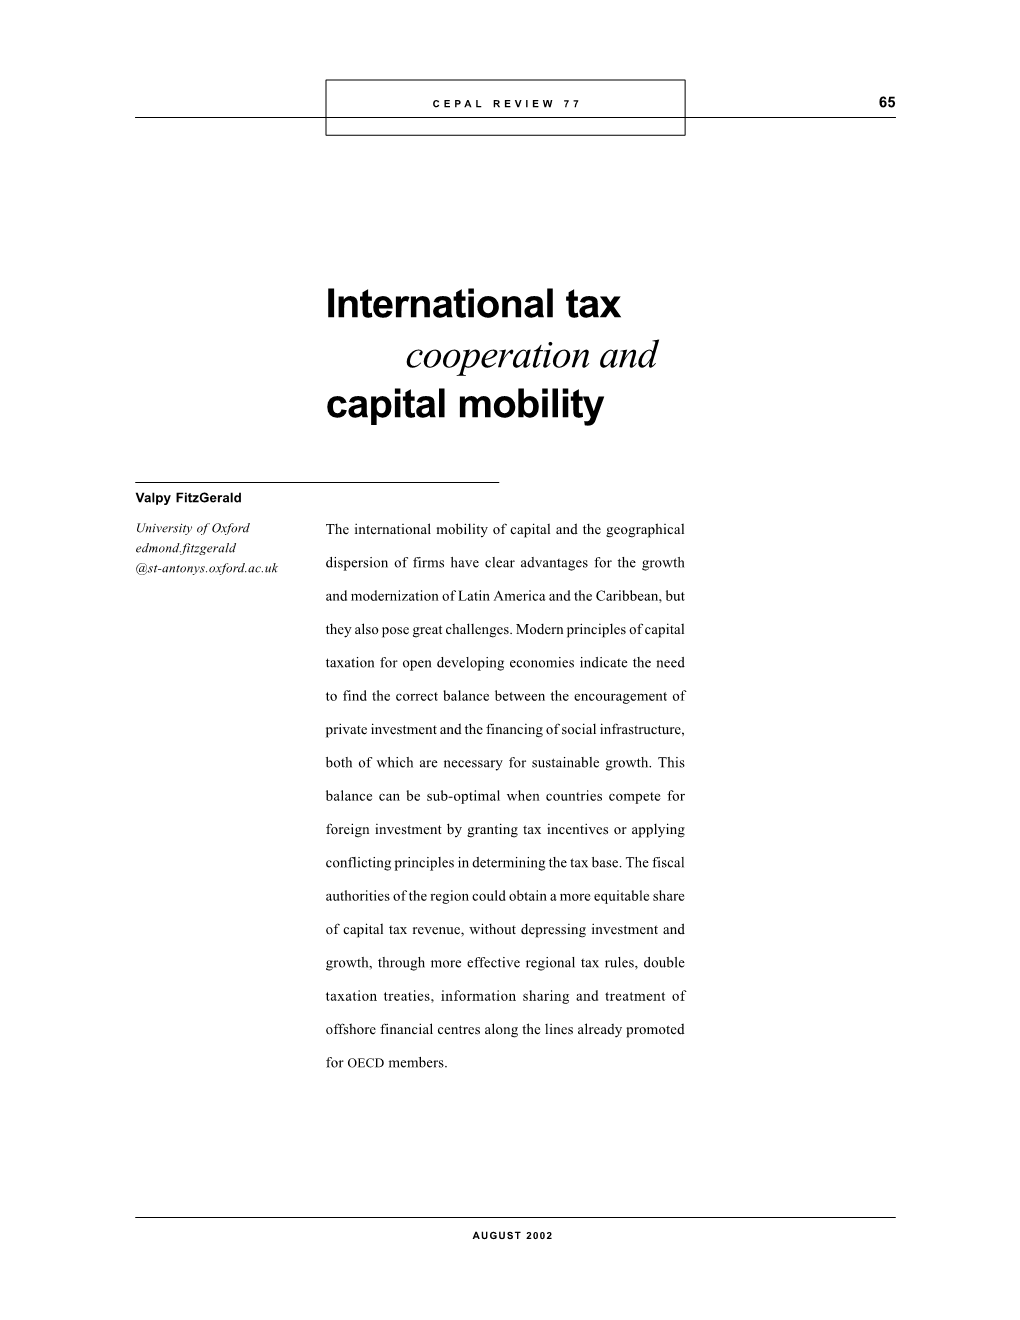 International Tax Cooperation and Capital Mobility